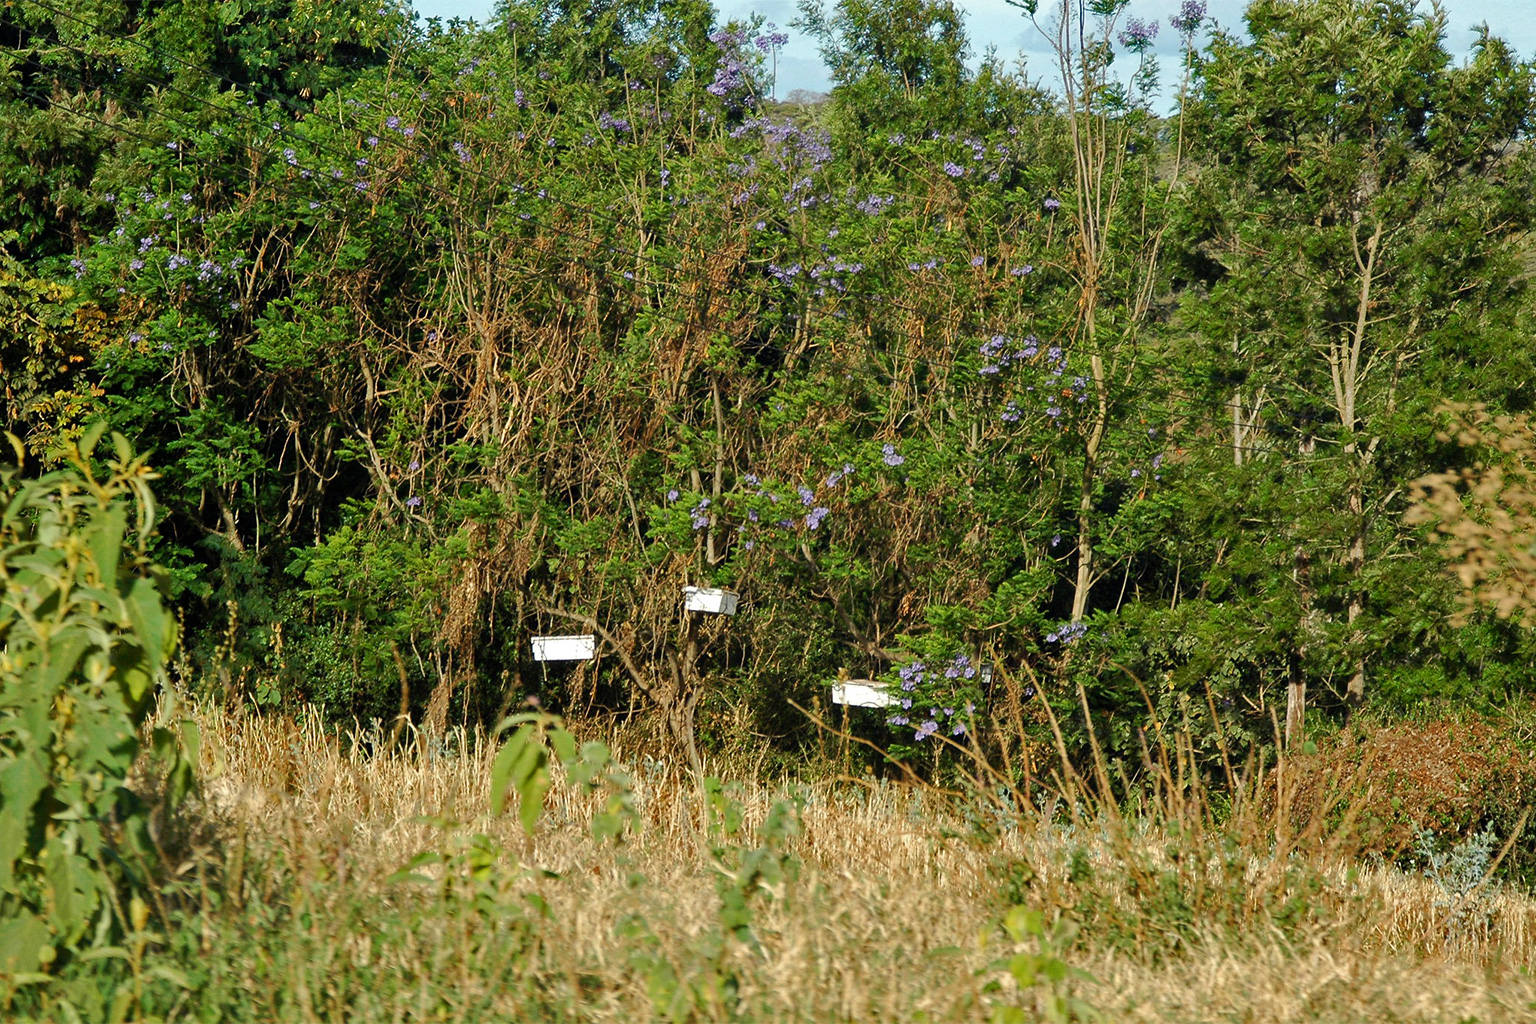 Modern hanging hives installed in trees.